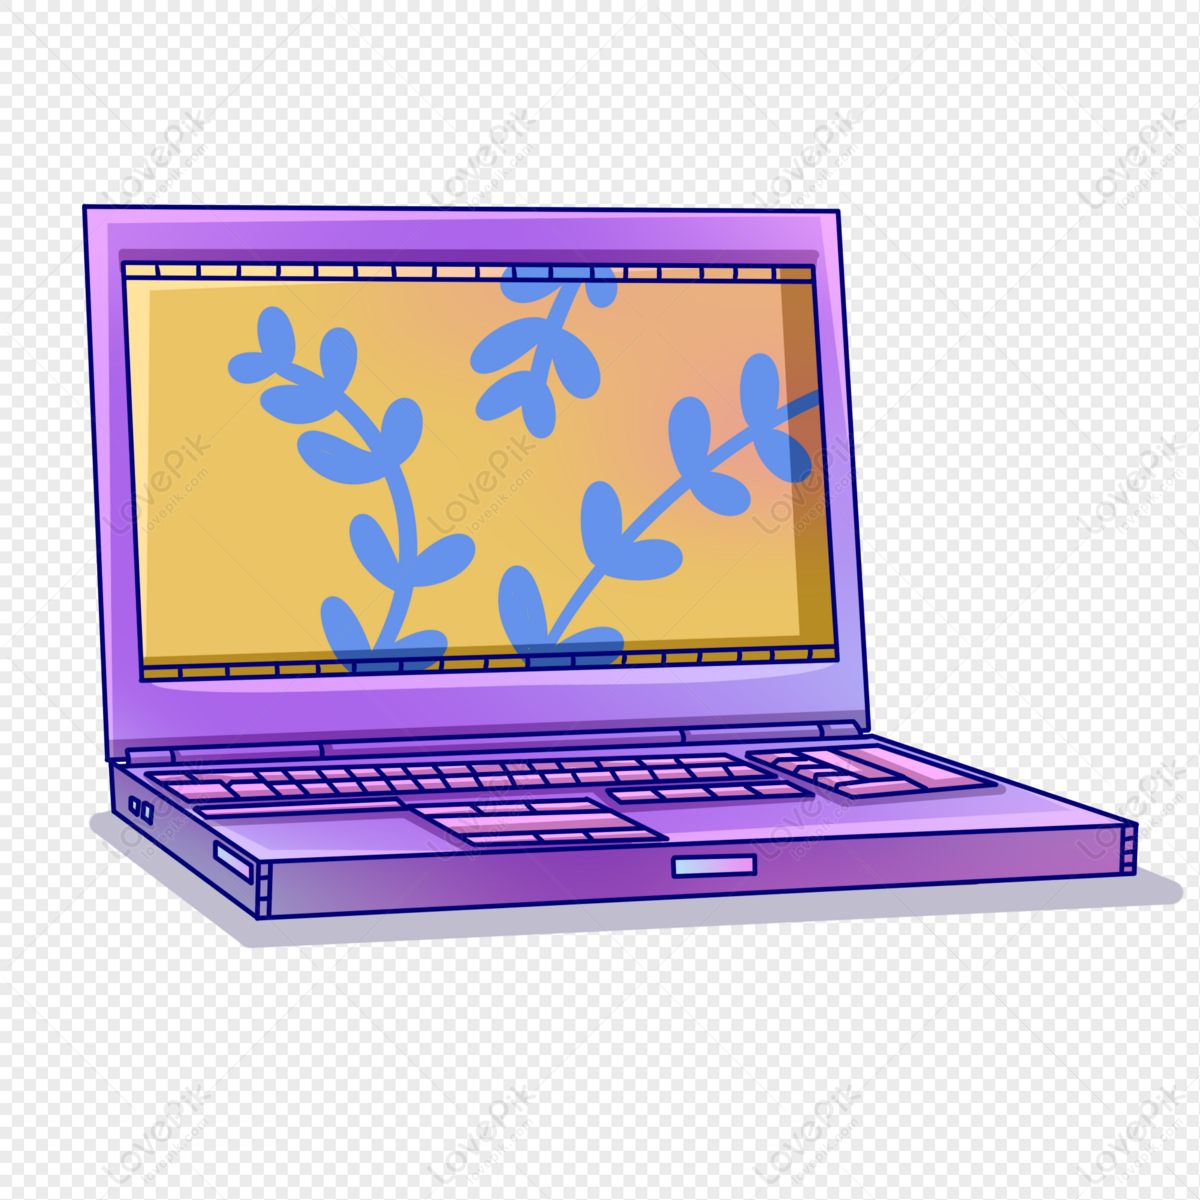 Cartoon Laptop PNG Transparent Background And Clipart Image For Free  Download - Lovepik | 401483070